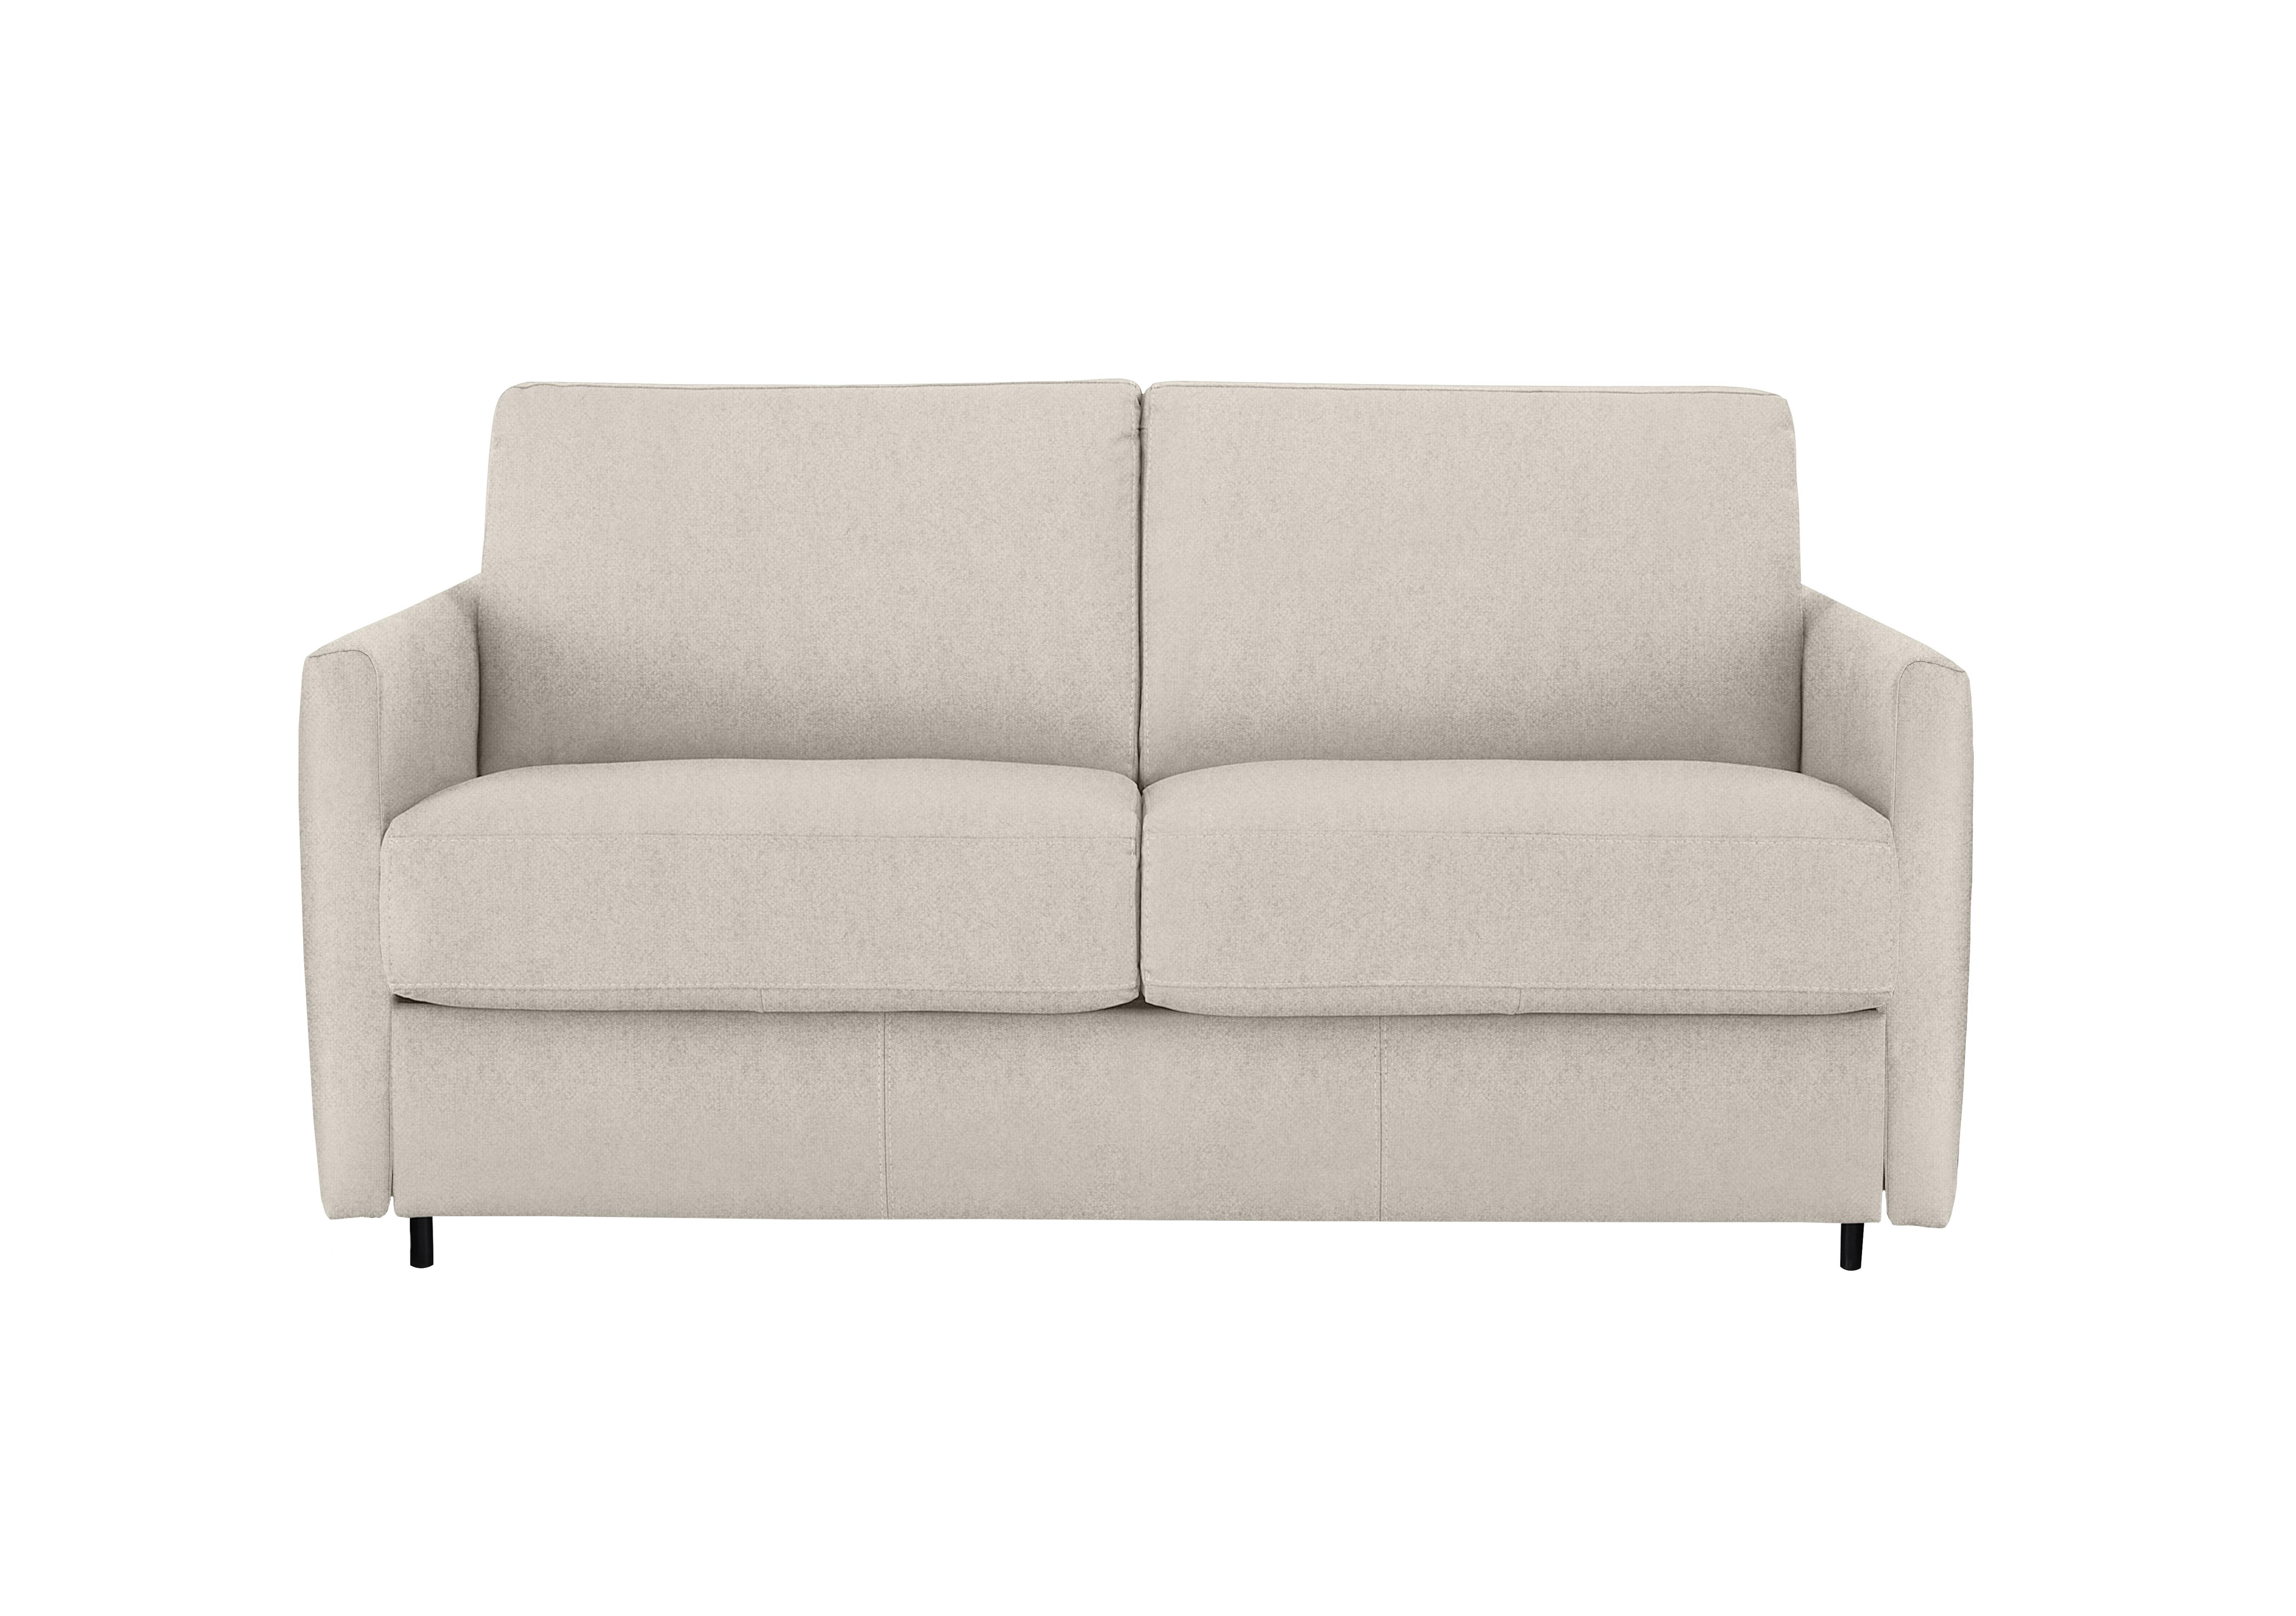 Alcova 2 Seater Fabric Sofa Bed with Slim Arms in Fuente Beige on Furniture Village